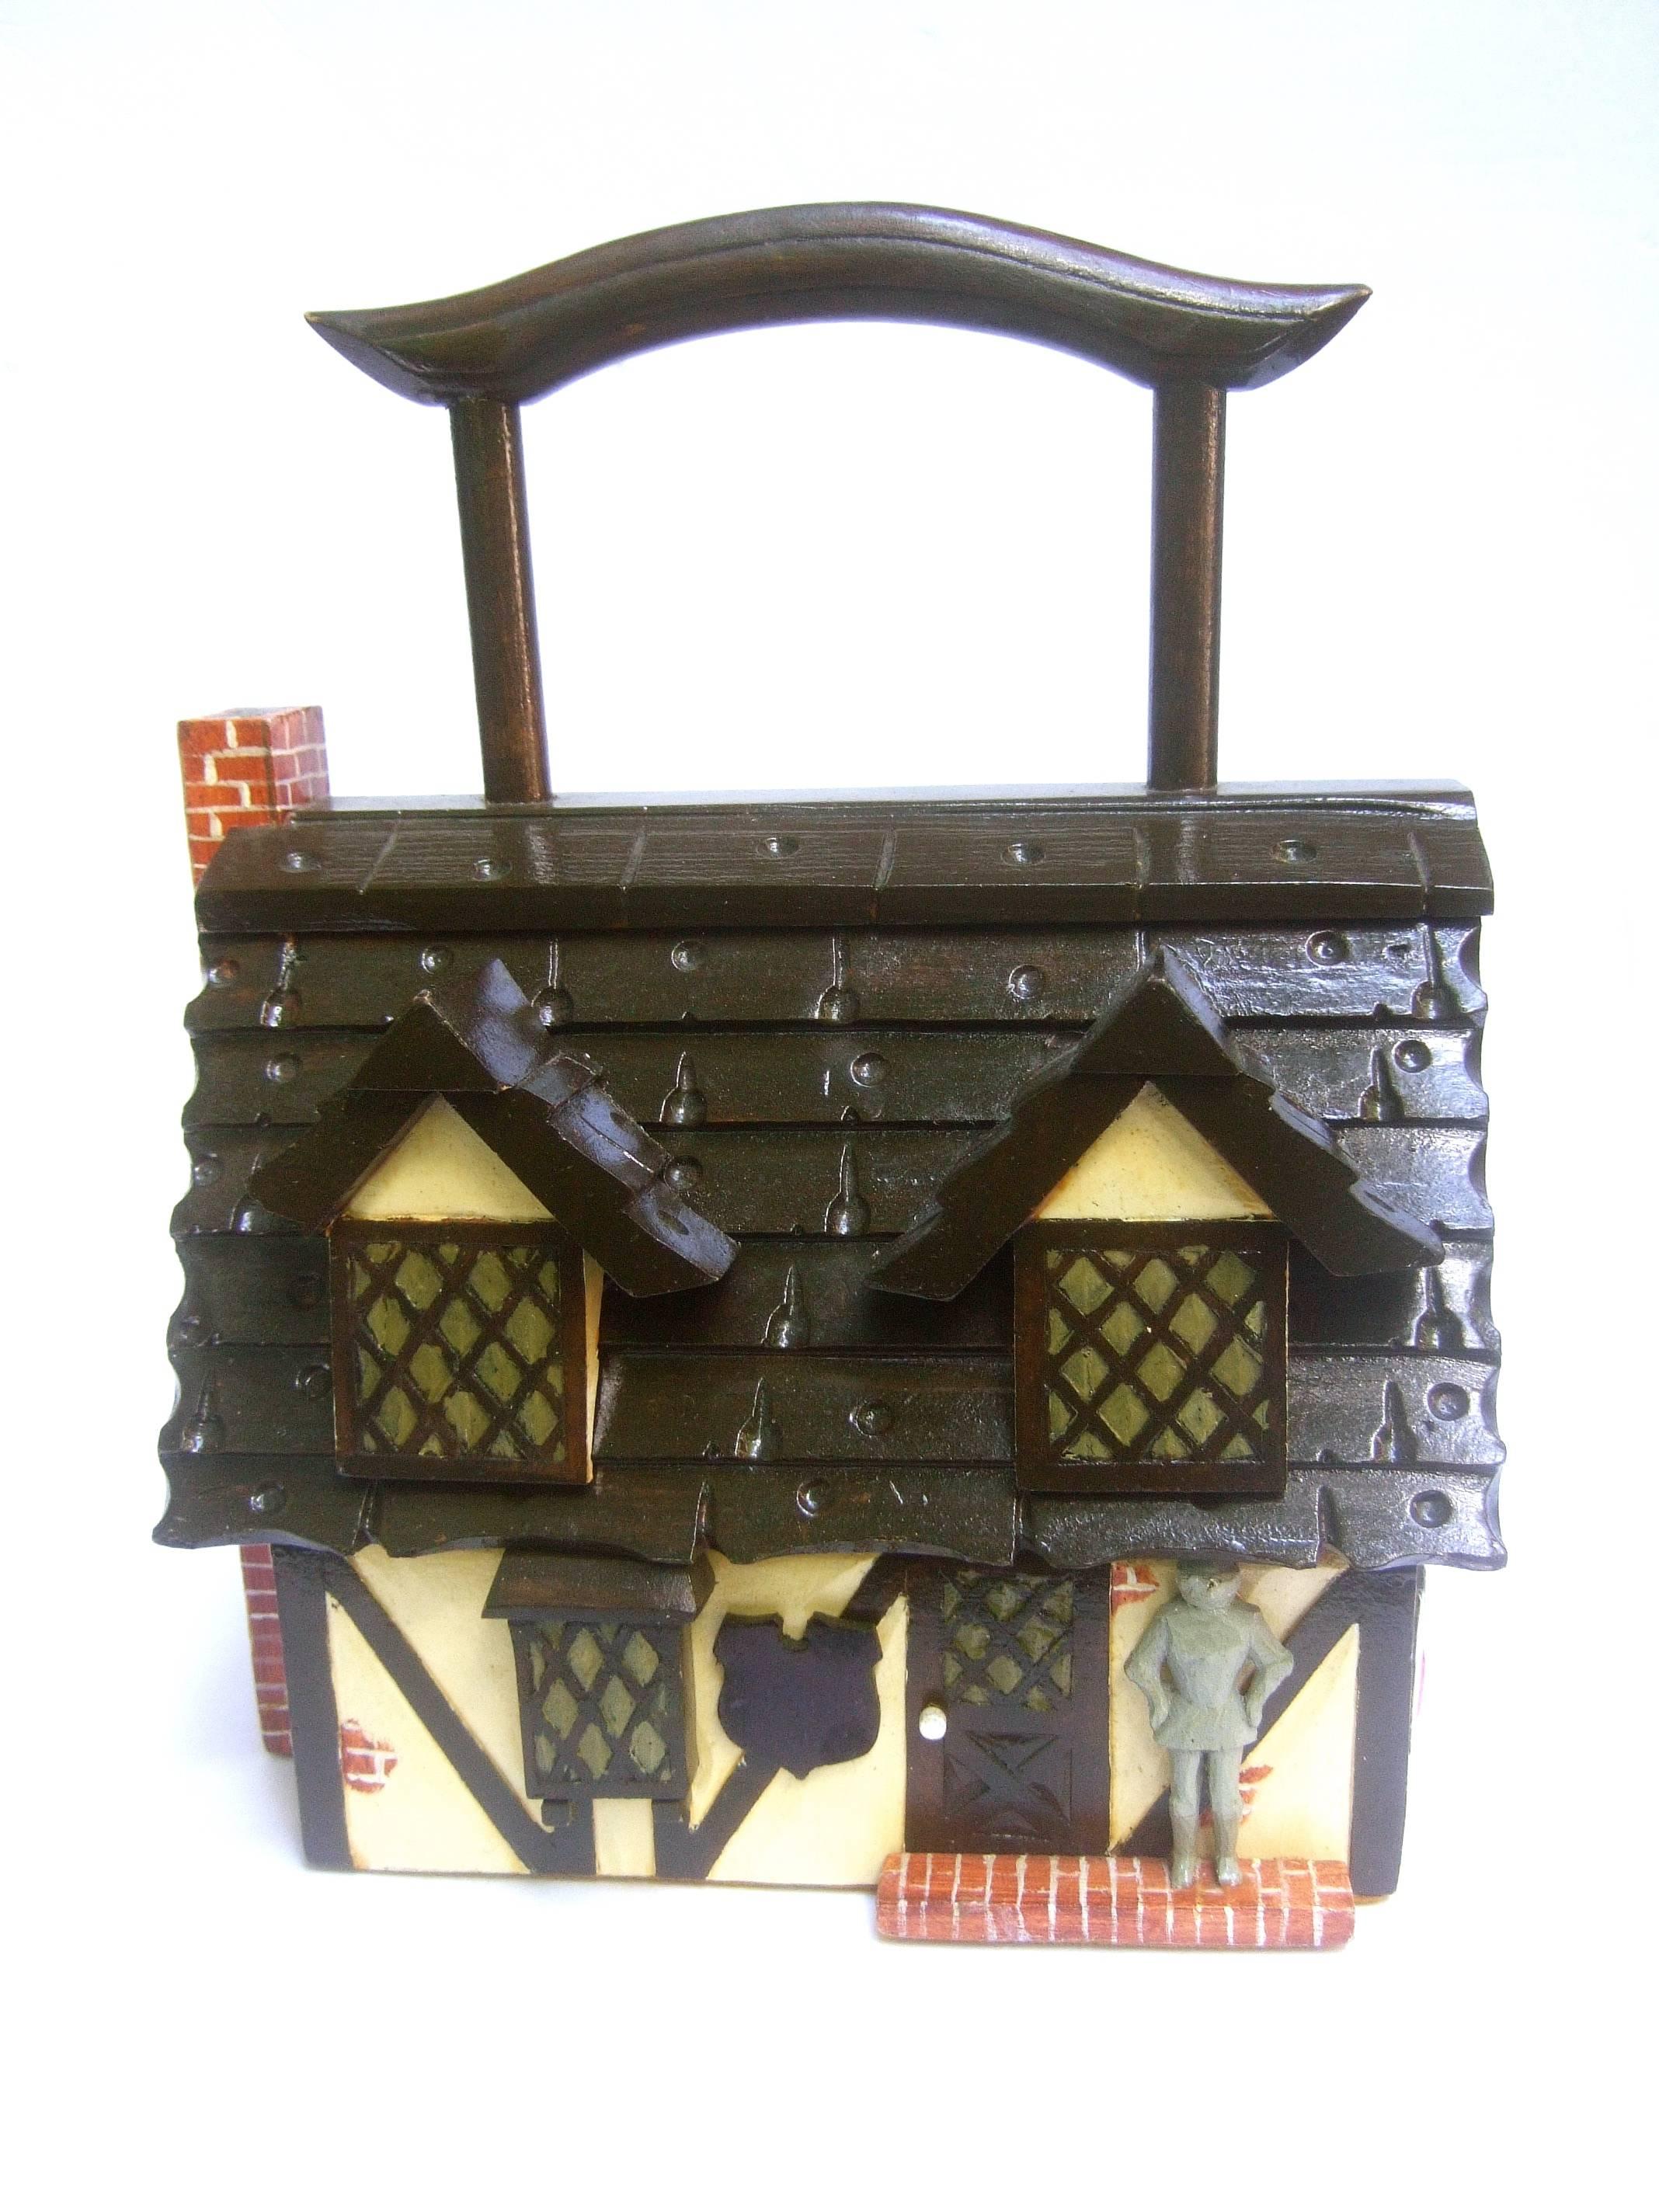 Whimsical artisan wood tudor house box purse c 1970
The quirky handmade wood house theme handbag
is designed in the style of an English tudor cottage 

Presiding at the front entrance is a knight figure
The front door and windows have hand painted  